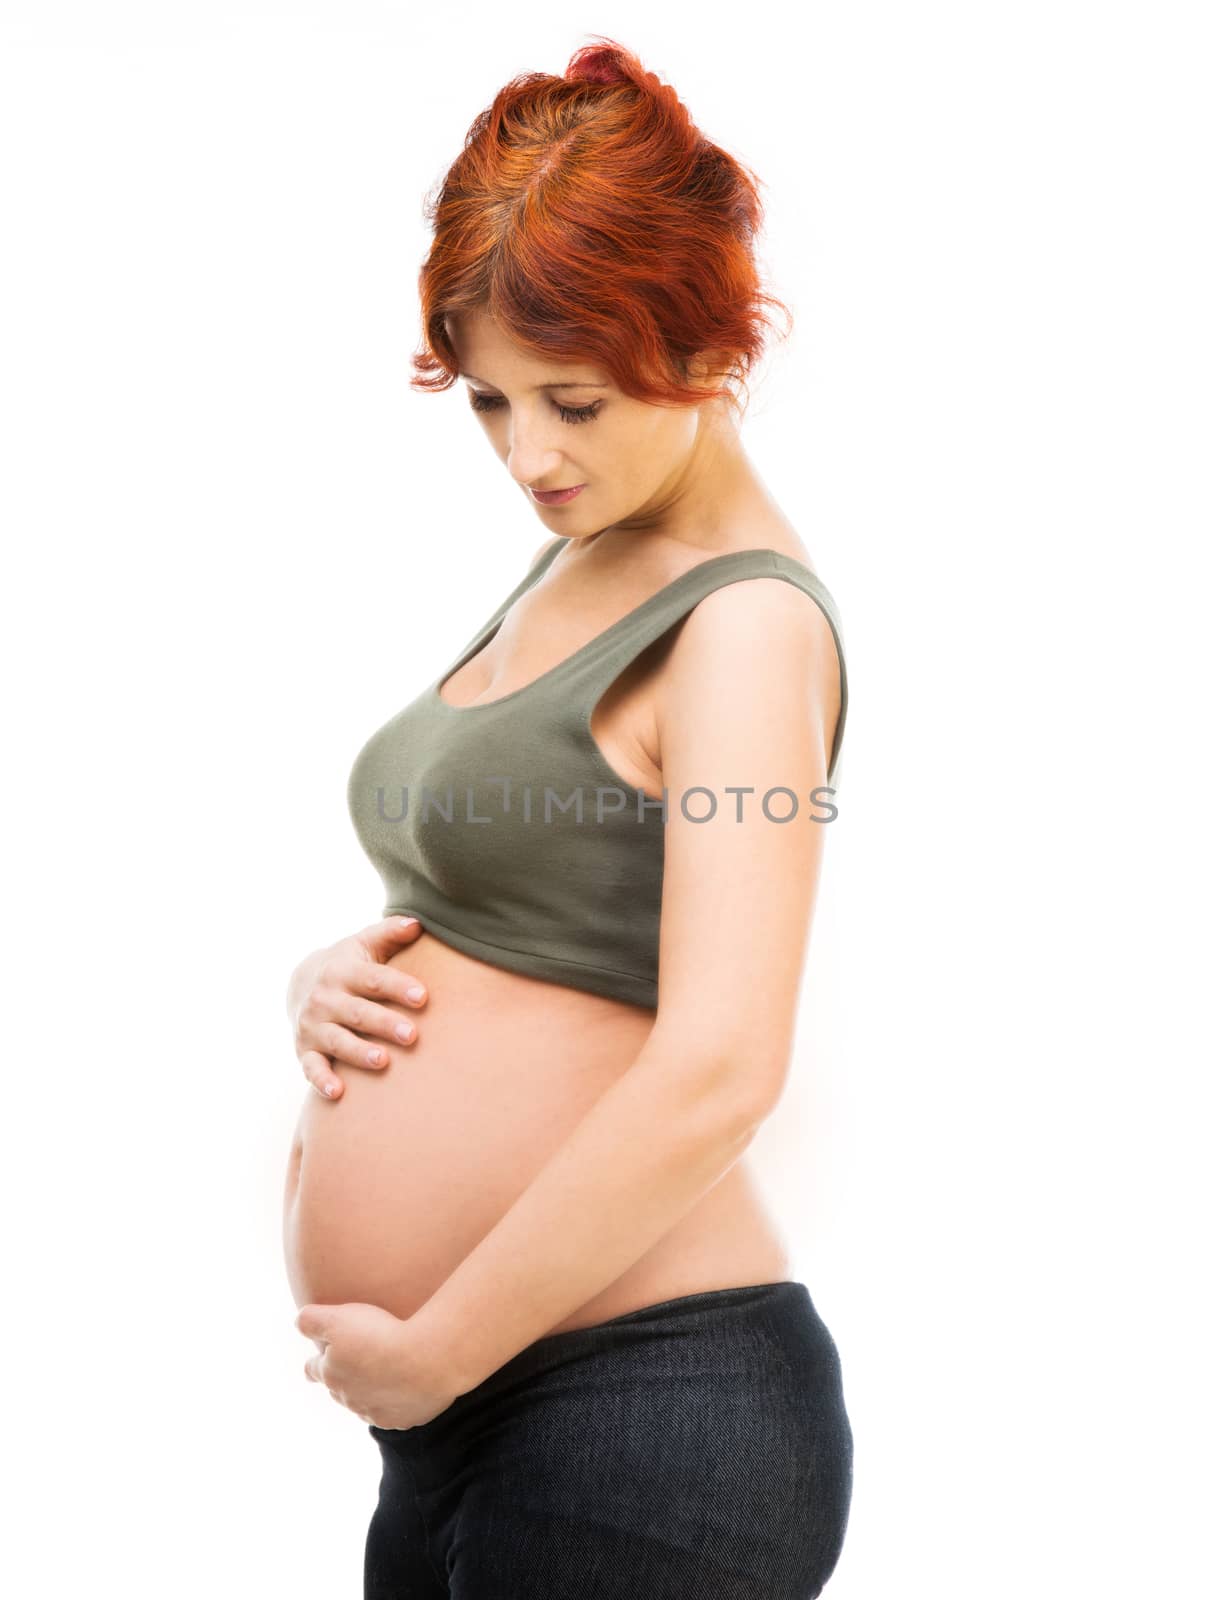 redhead pregnant woman isolated on white